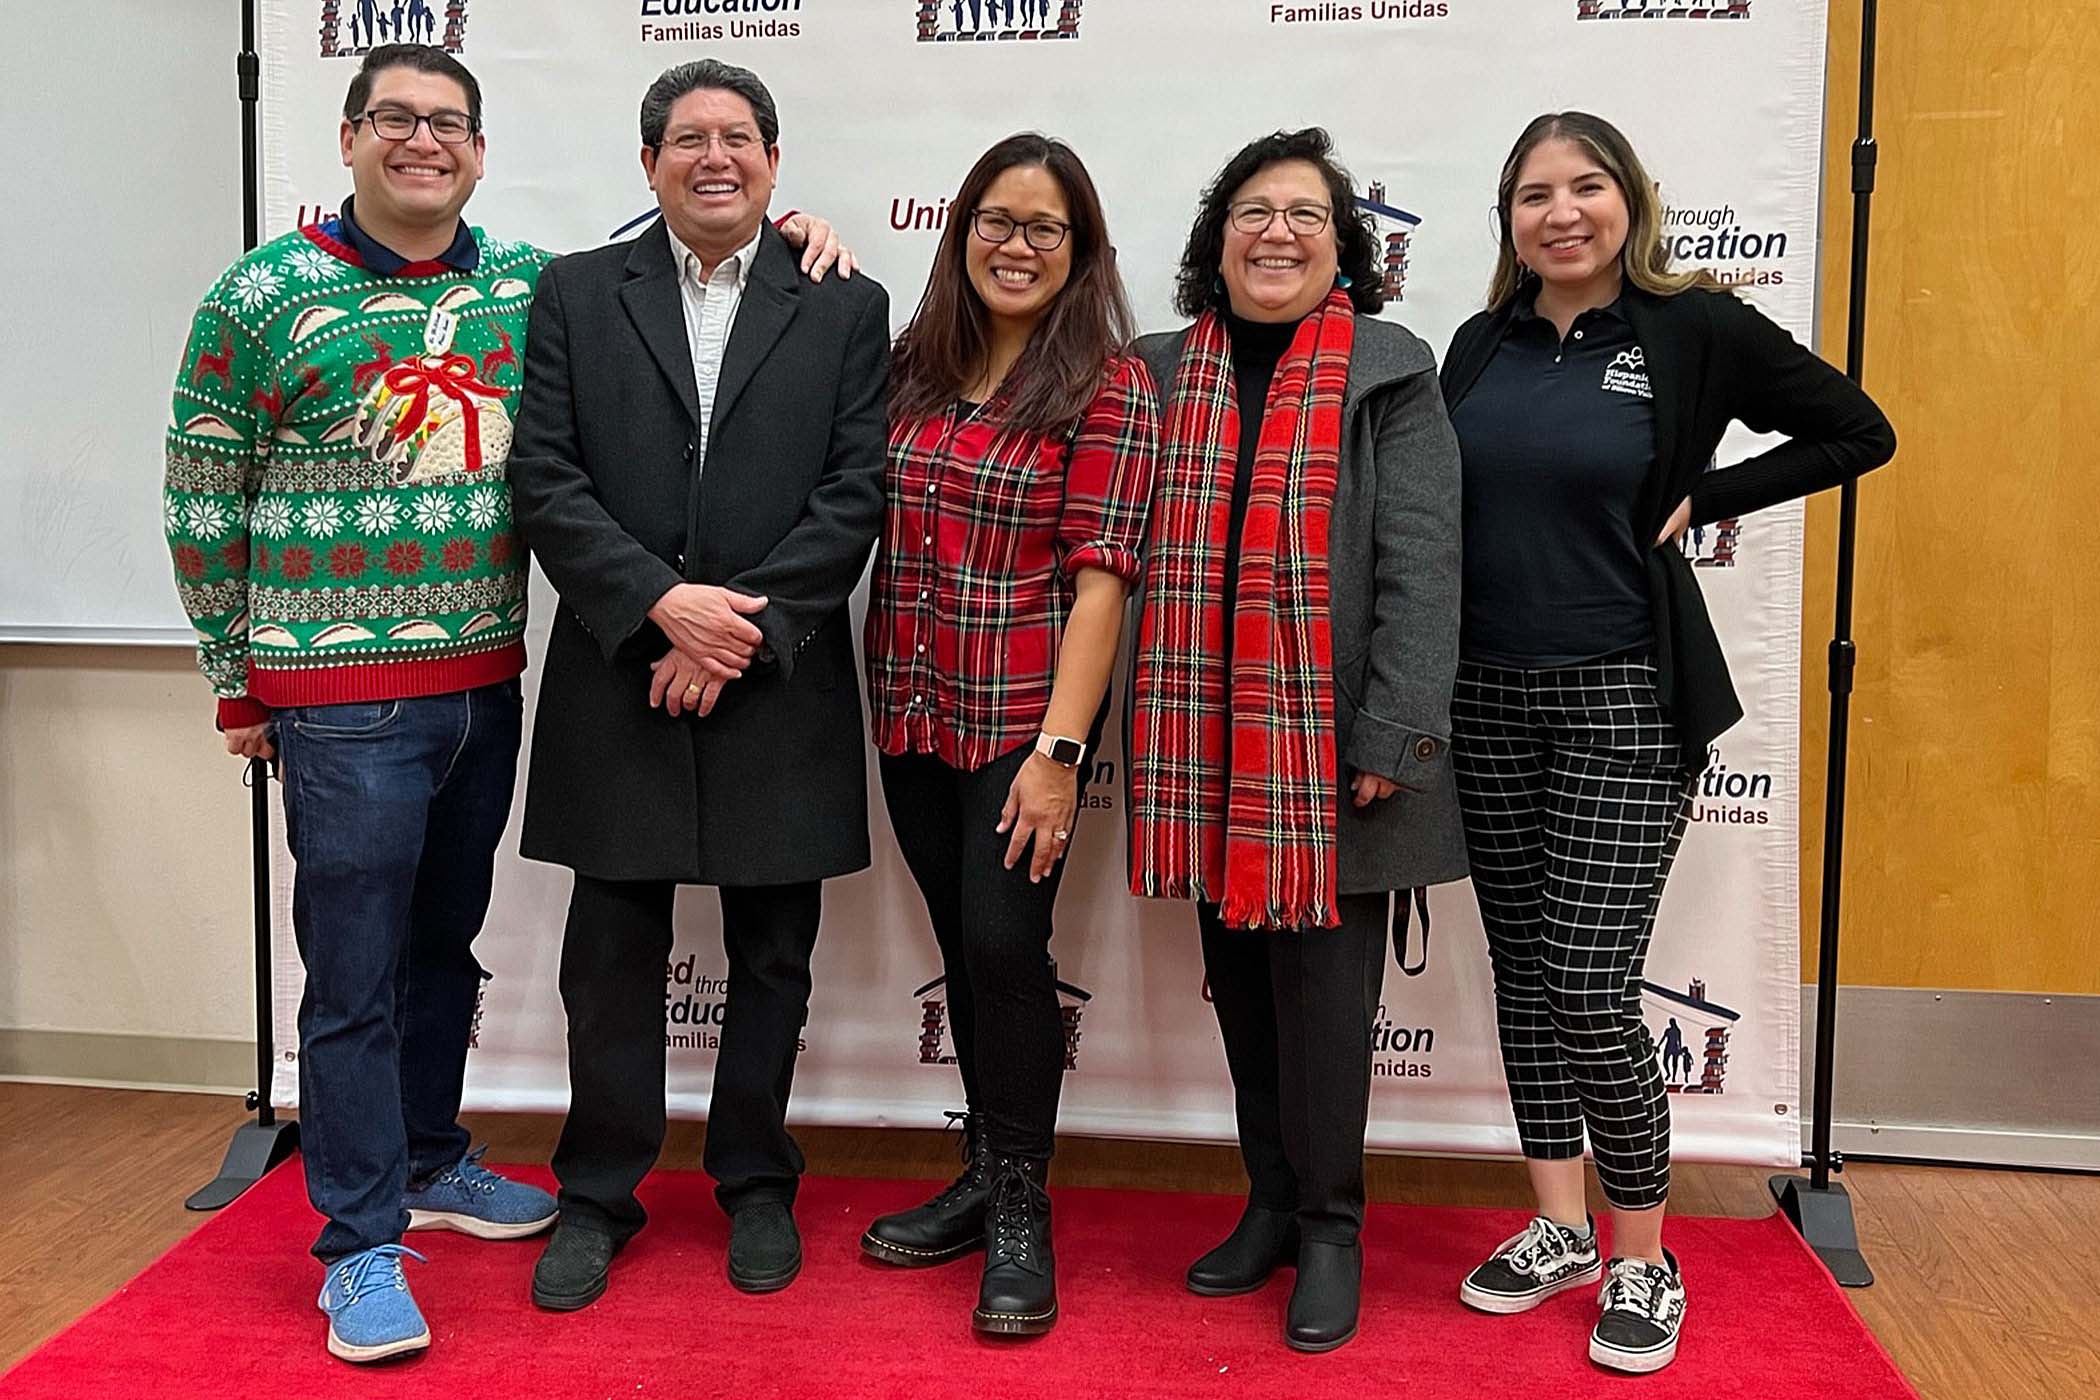 Two men (left) and three women (right) smile directly at camera. Most are in holiday attire and all are standing at a step and repeat.